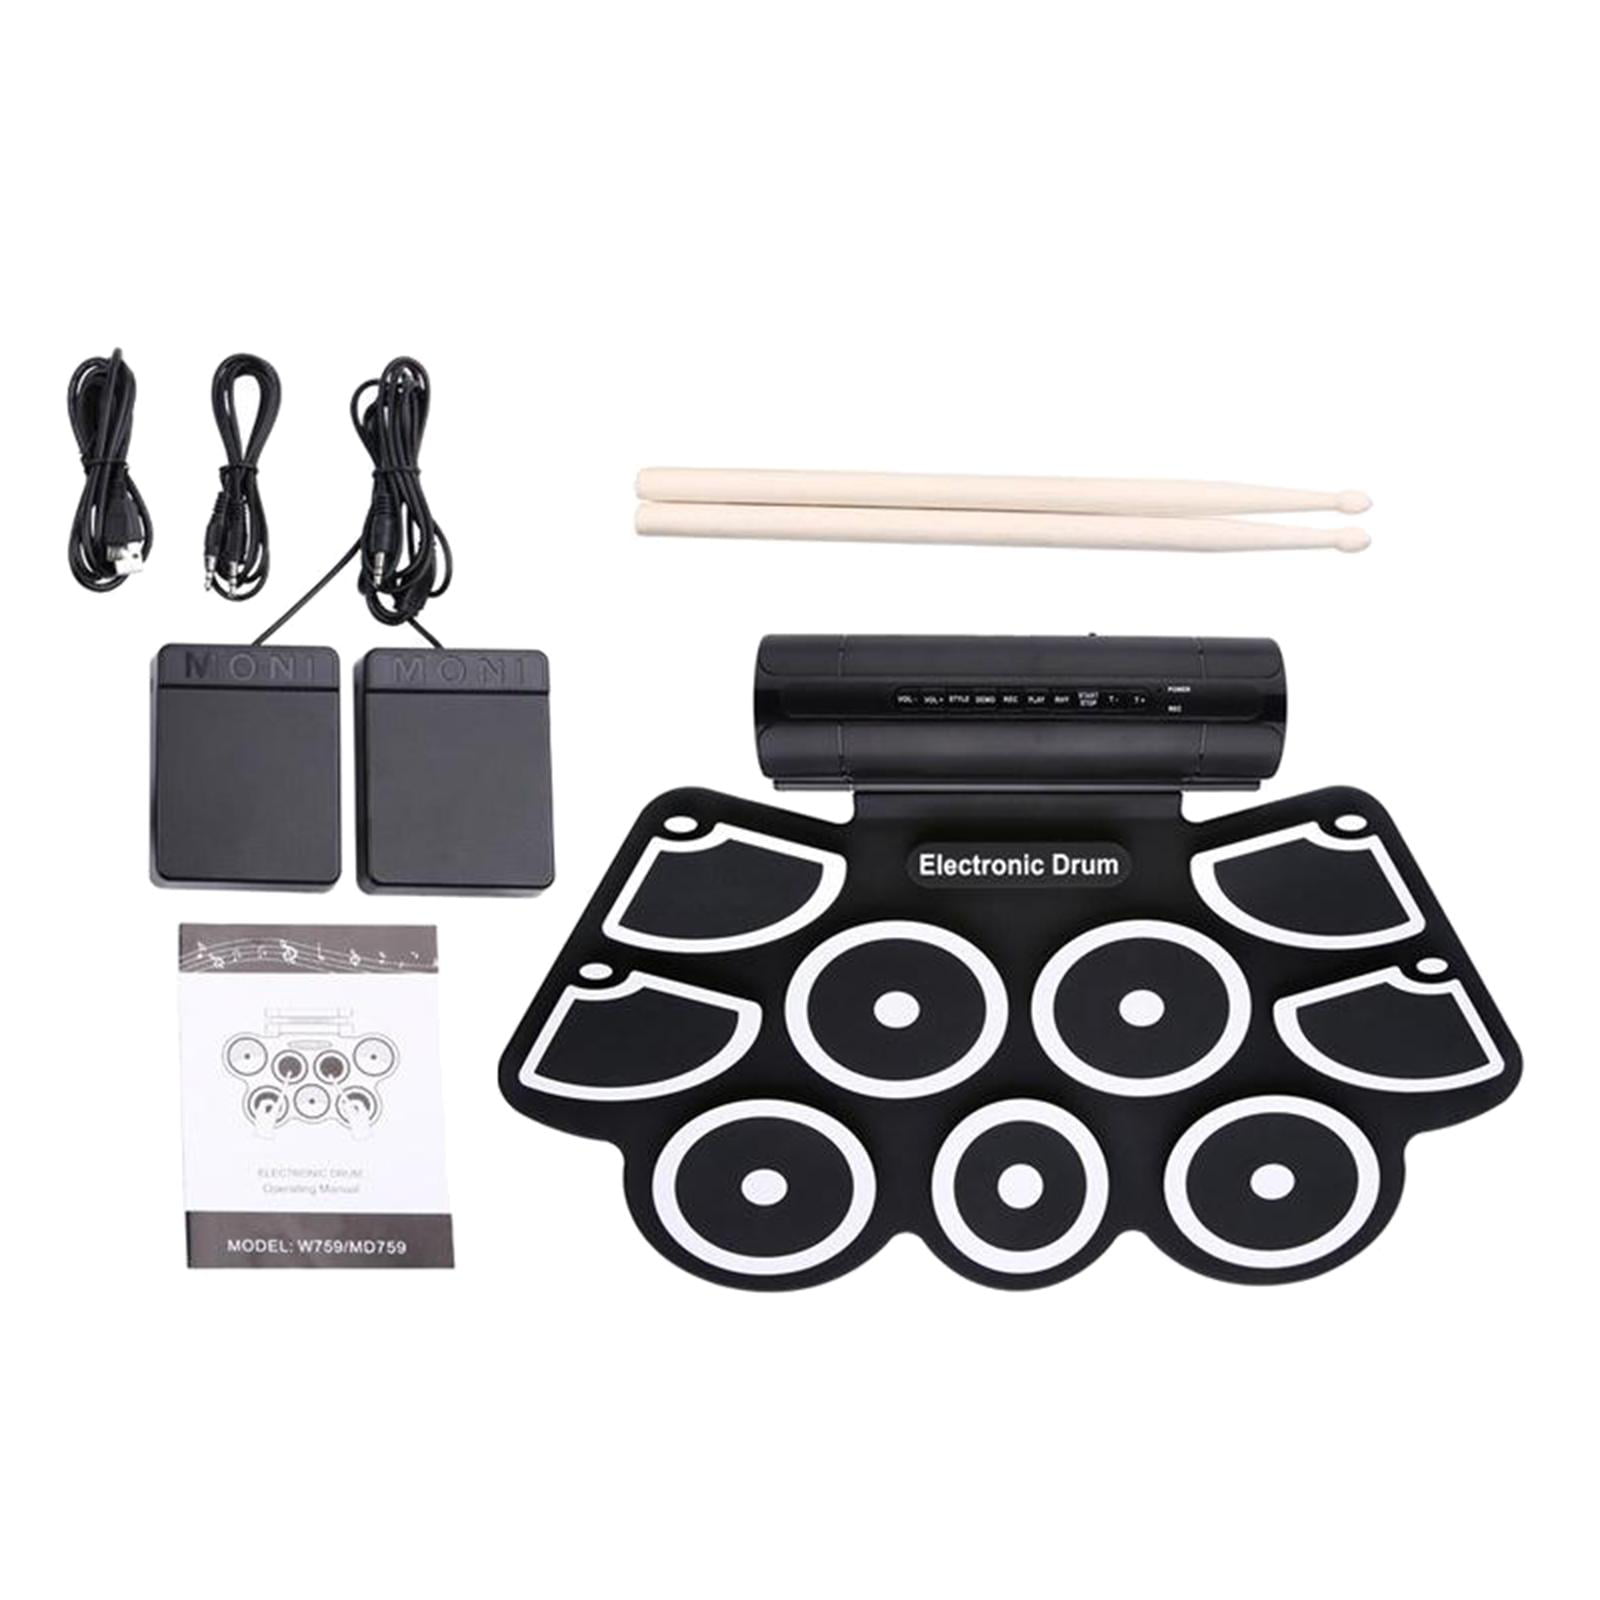 Tabletop Electronic Drum Set, Foldable Roll Up Drum 9 Pads with 2 